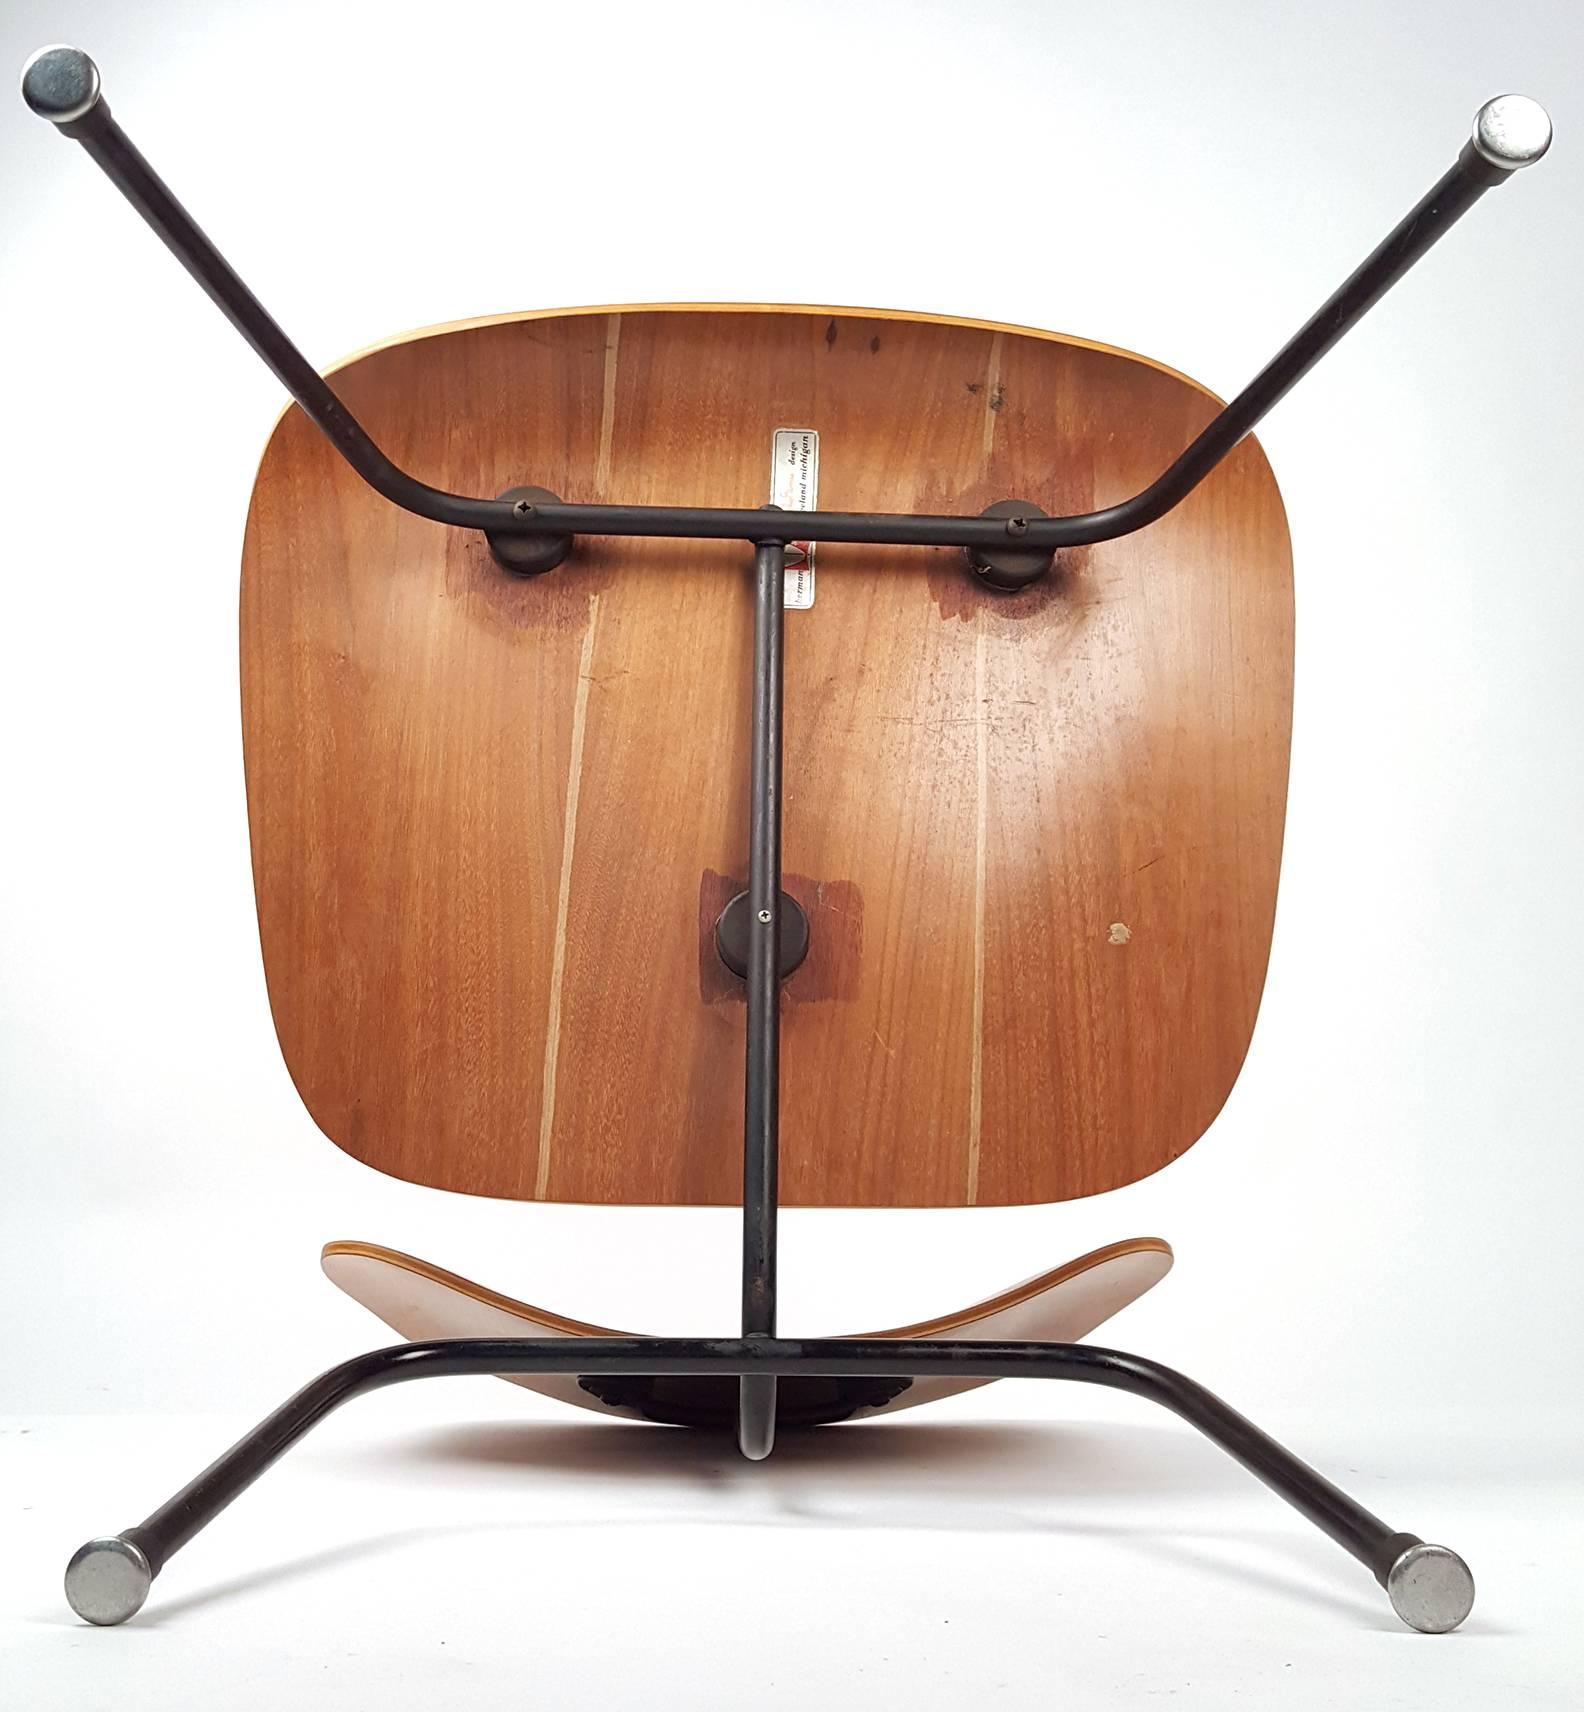 Mid-20th Century Charles Eames LCM Chair for Herman Miller, 1950s walnut and black